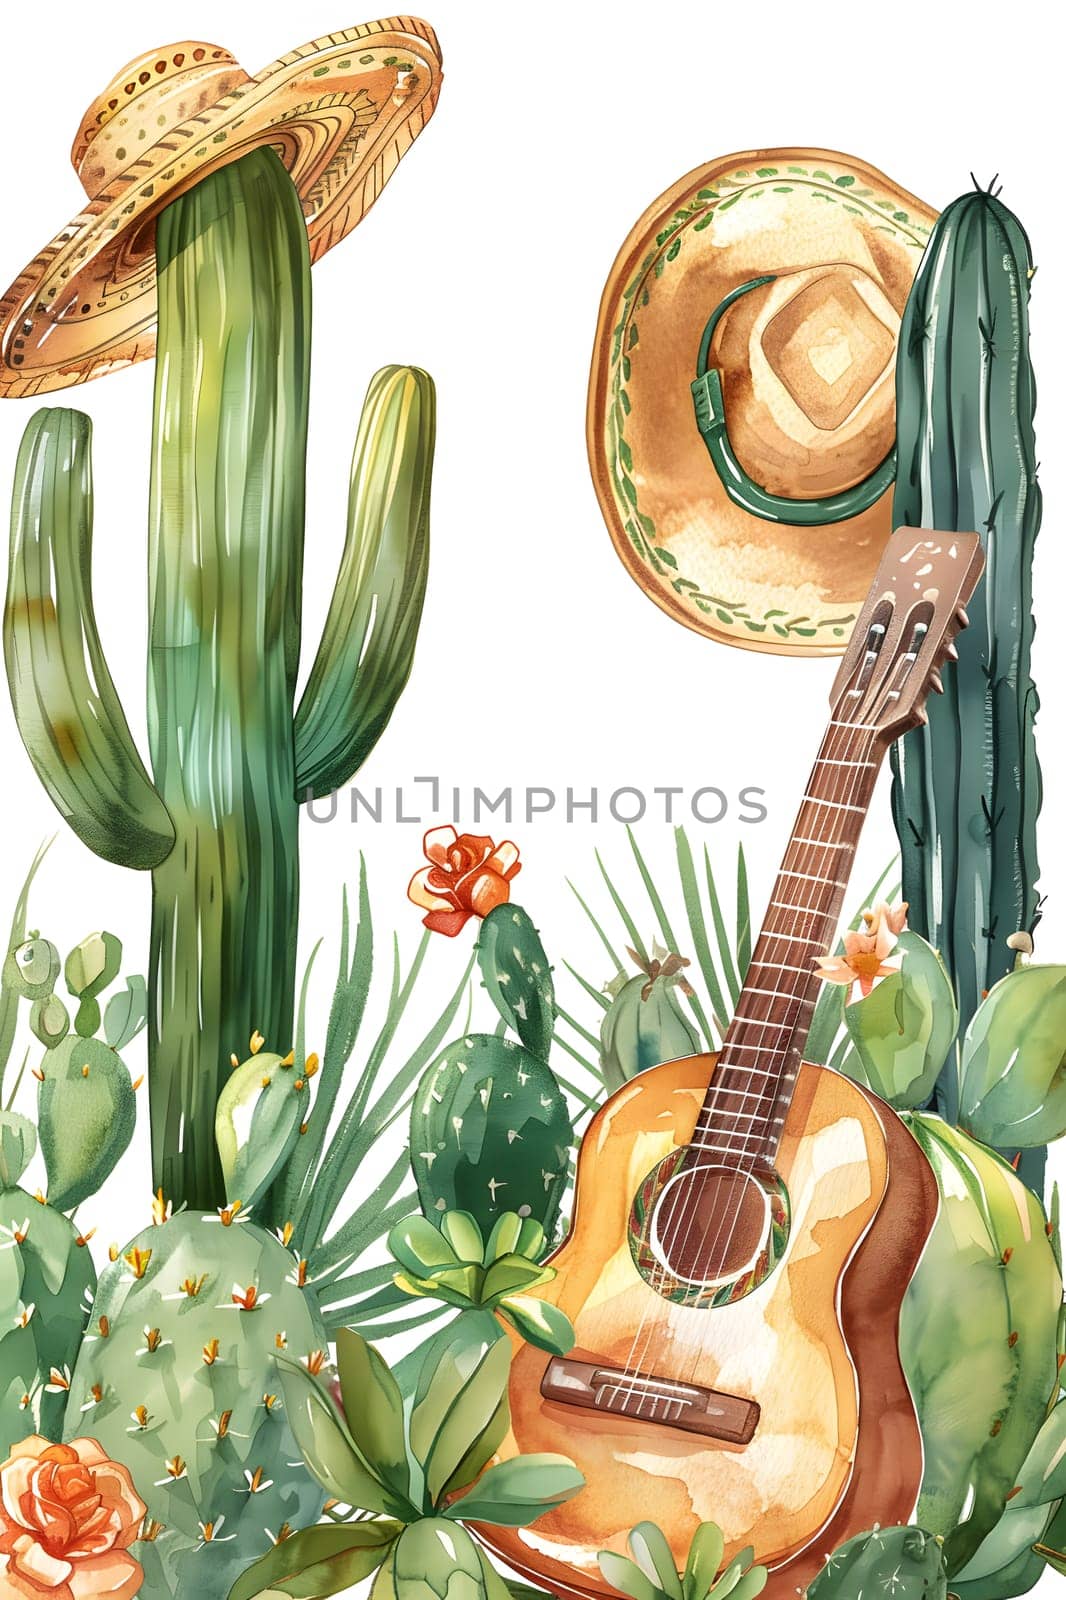 A musical instrument, the guitar, is depicted in a painting surrounded by a sombrero and cactus. The green terrestrial plant adds a touch of botany to the artwork